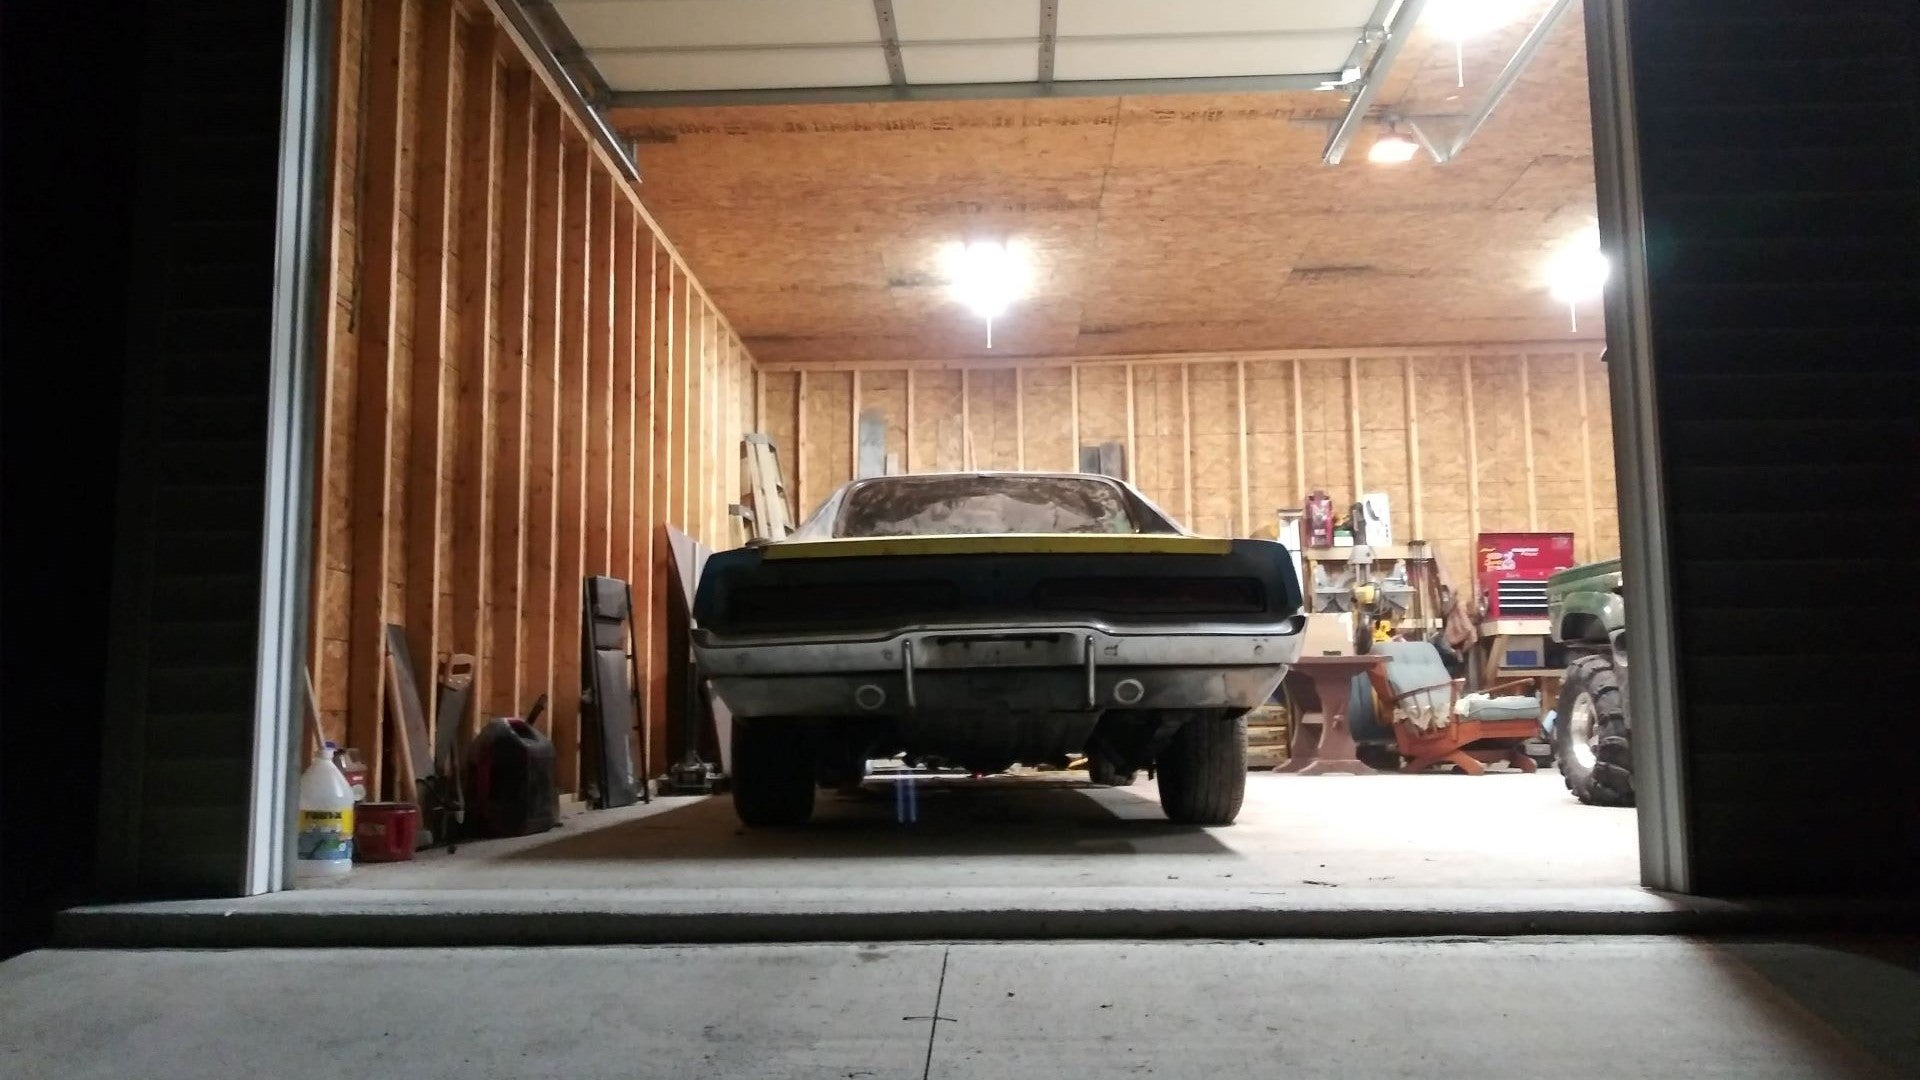 All Dream Garages Must Include A Garage Workbench With Storage